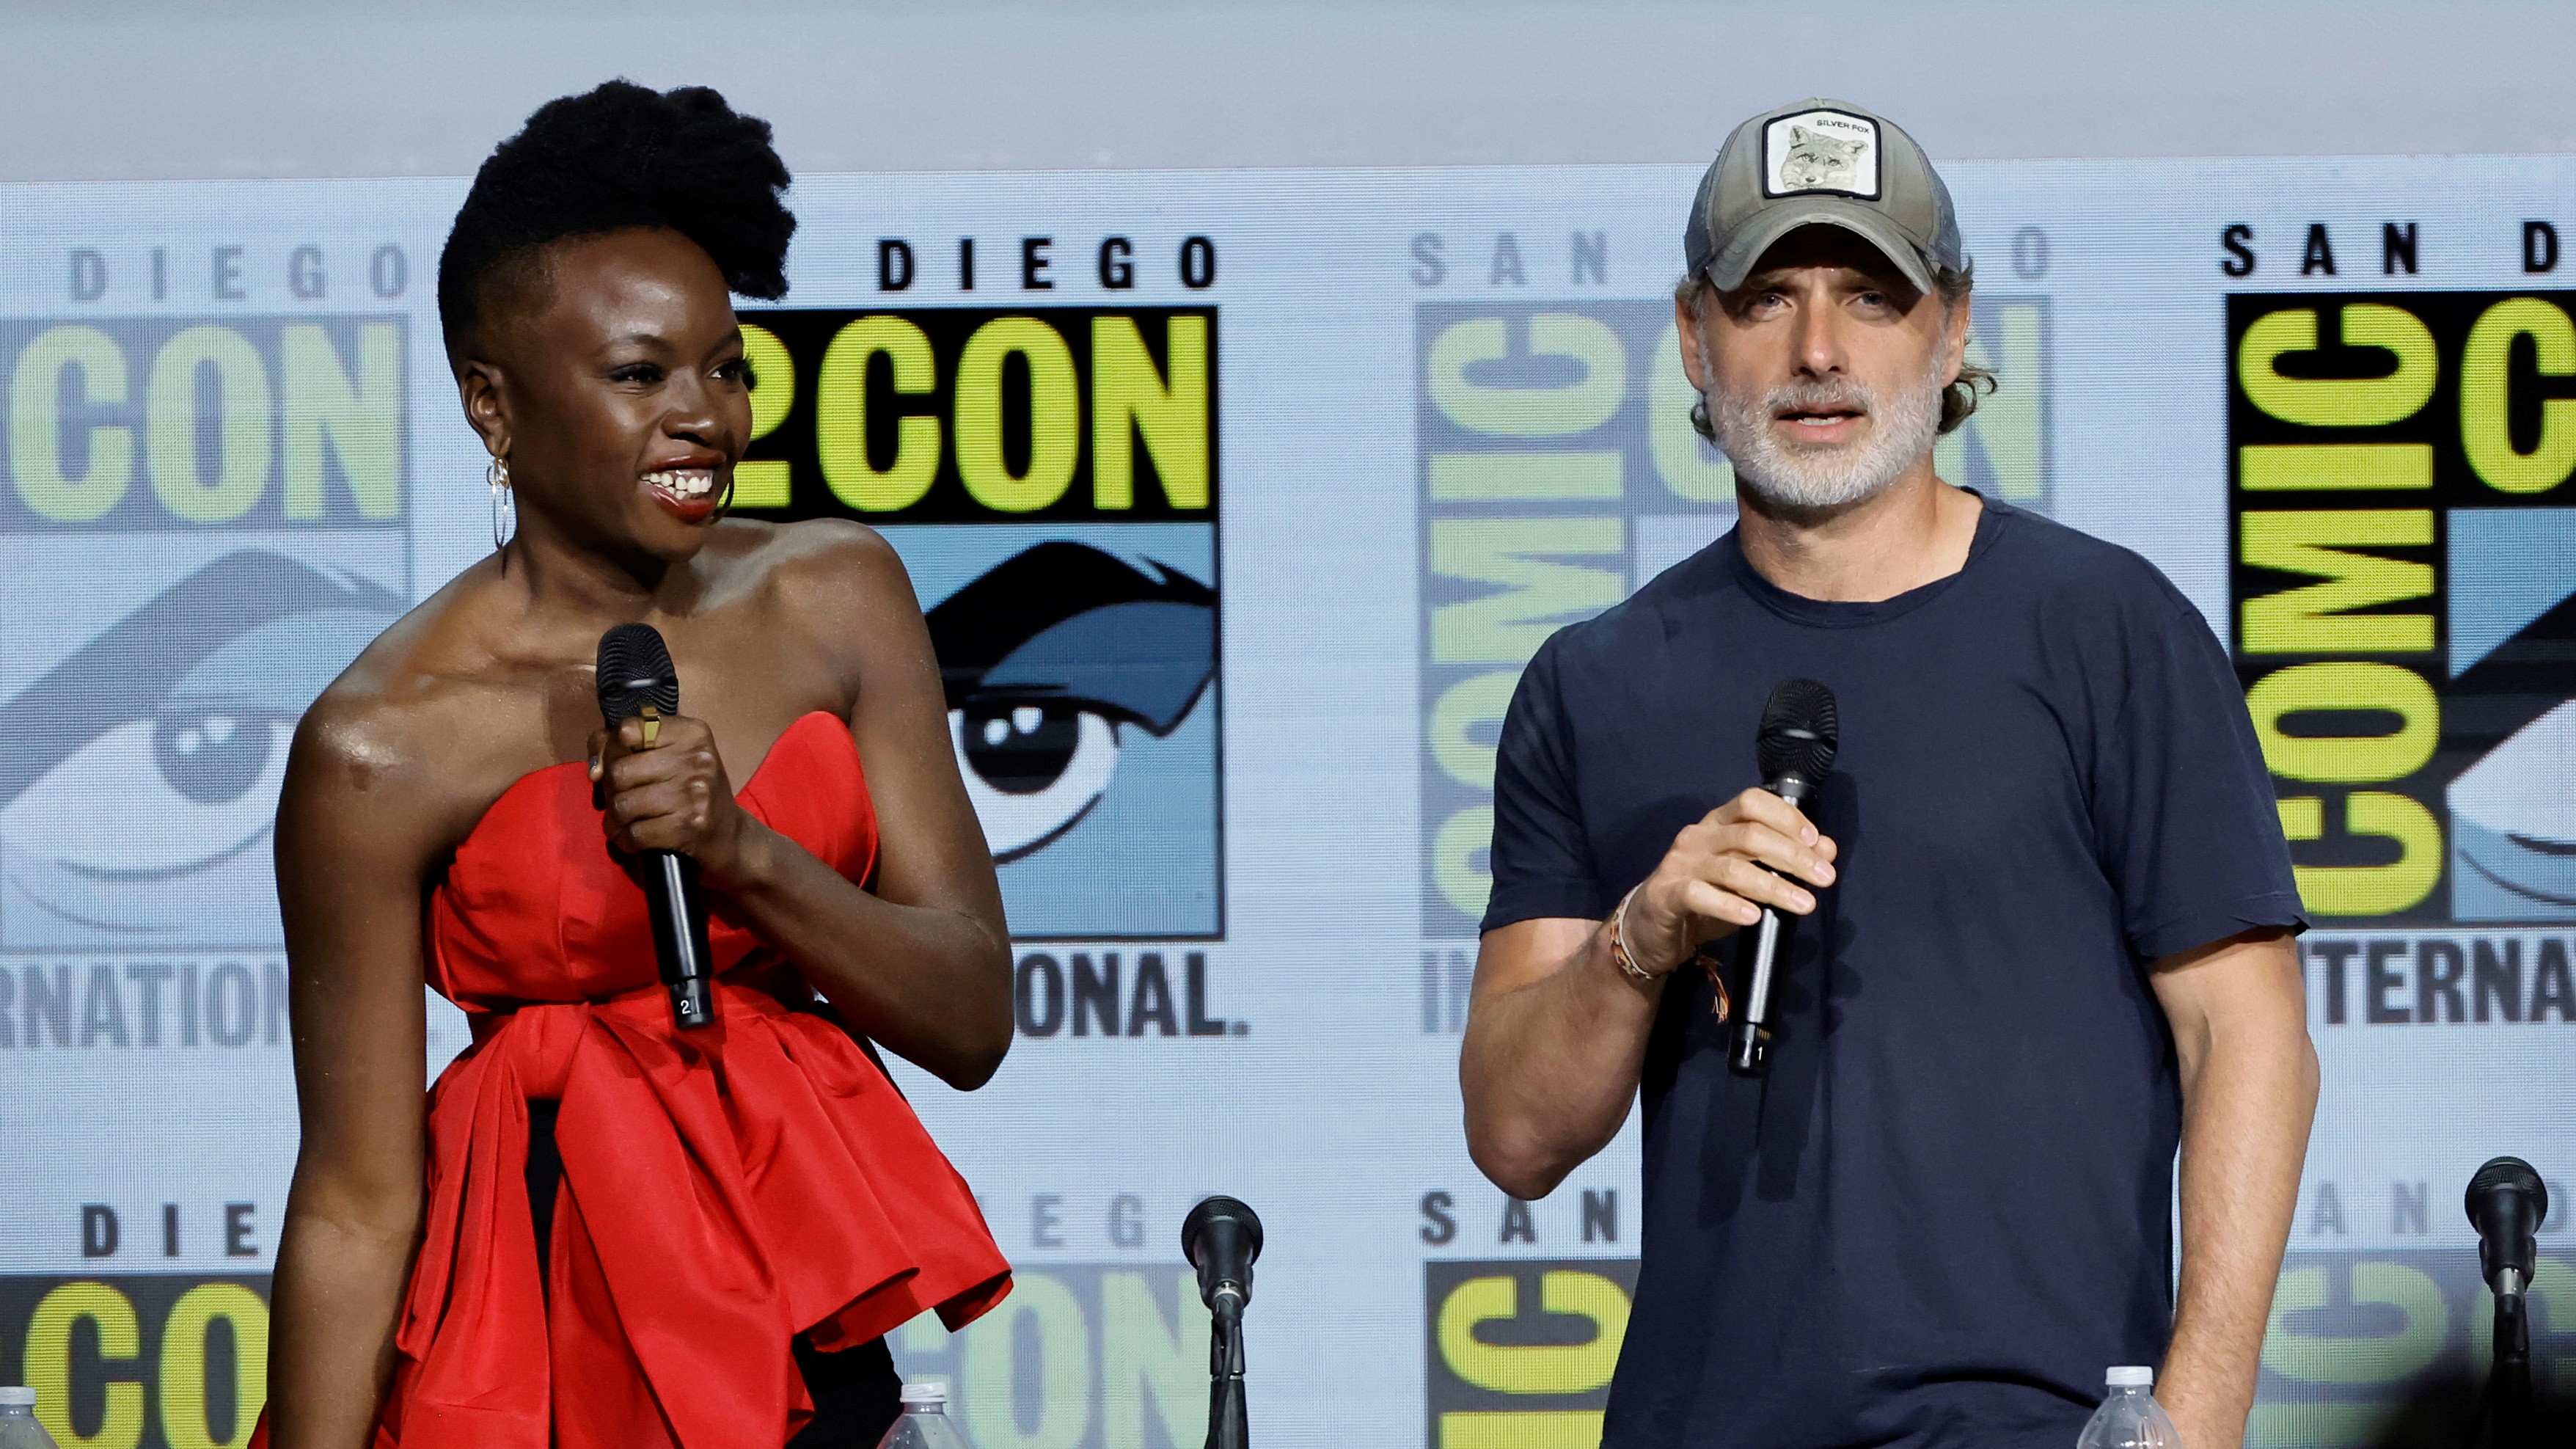 Comic Con At Home 2020 Schedule: Thursday Panels, Times